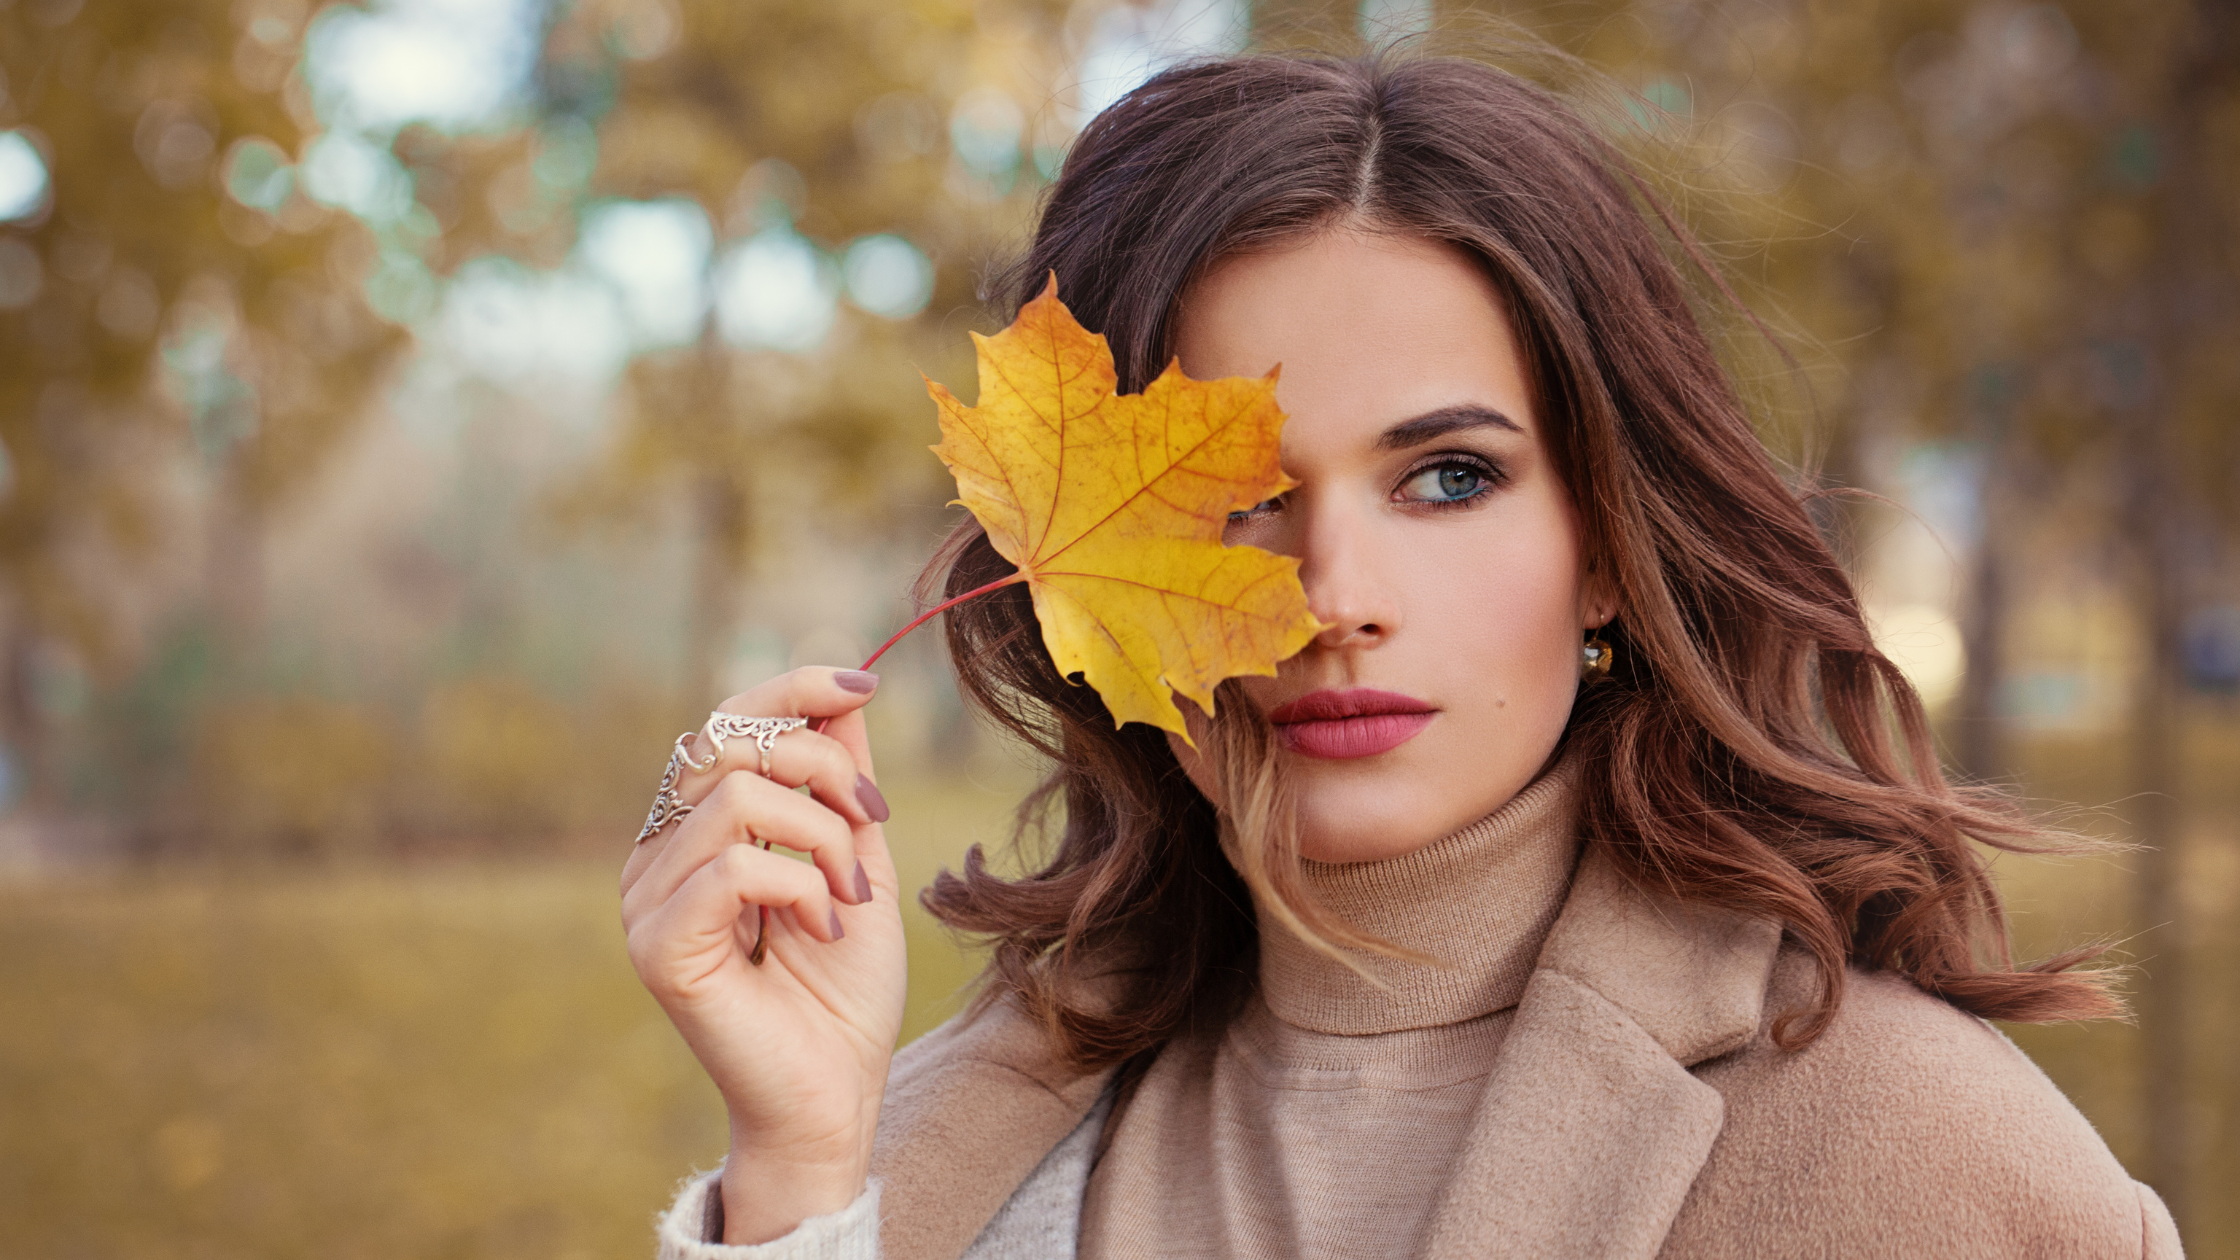 Is the Changing Season Leaving Your Hair Dry and Frizzy? Autumn Haircare 101